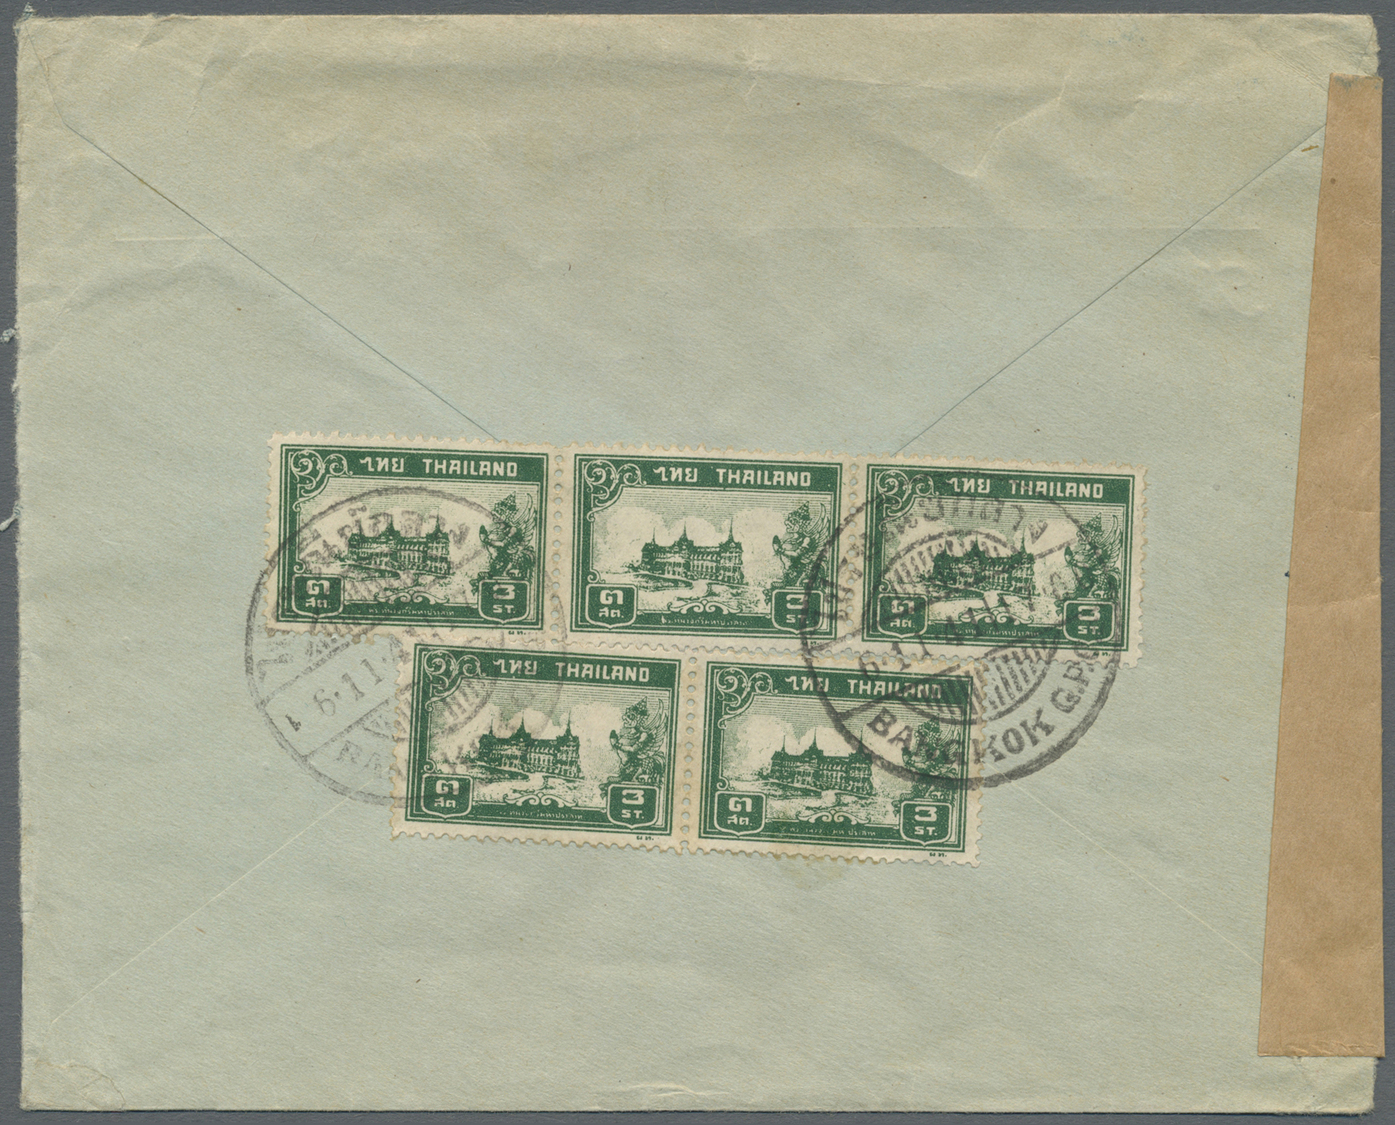 Br Thailand: 1941. Censored Envelope To New York Bearing SG 286, 3s Green (5) Tied By Bilingual Bangkok Date Stamp With - Thaïlande